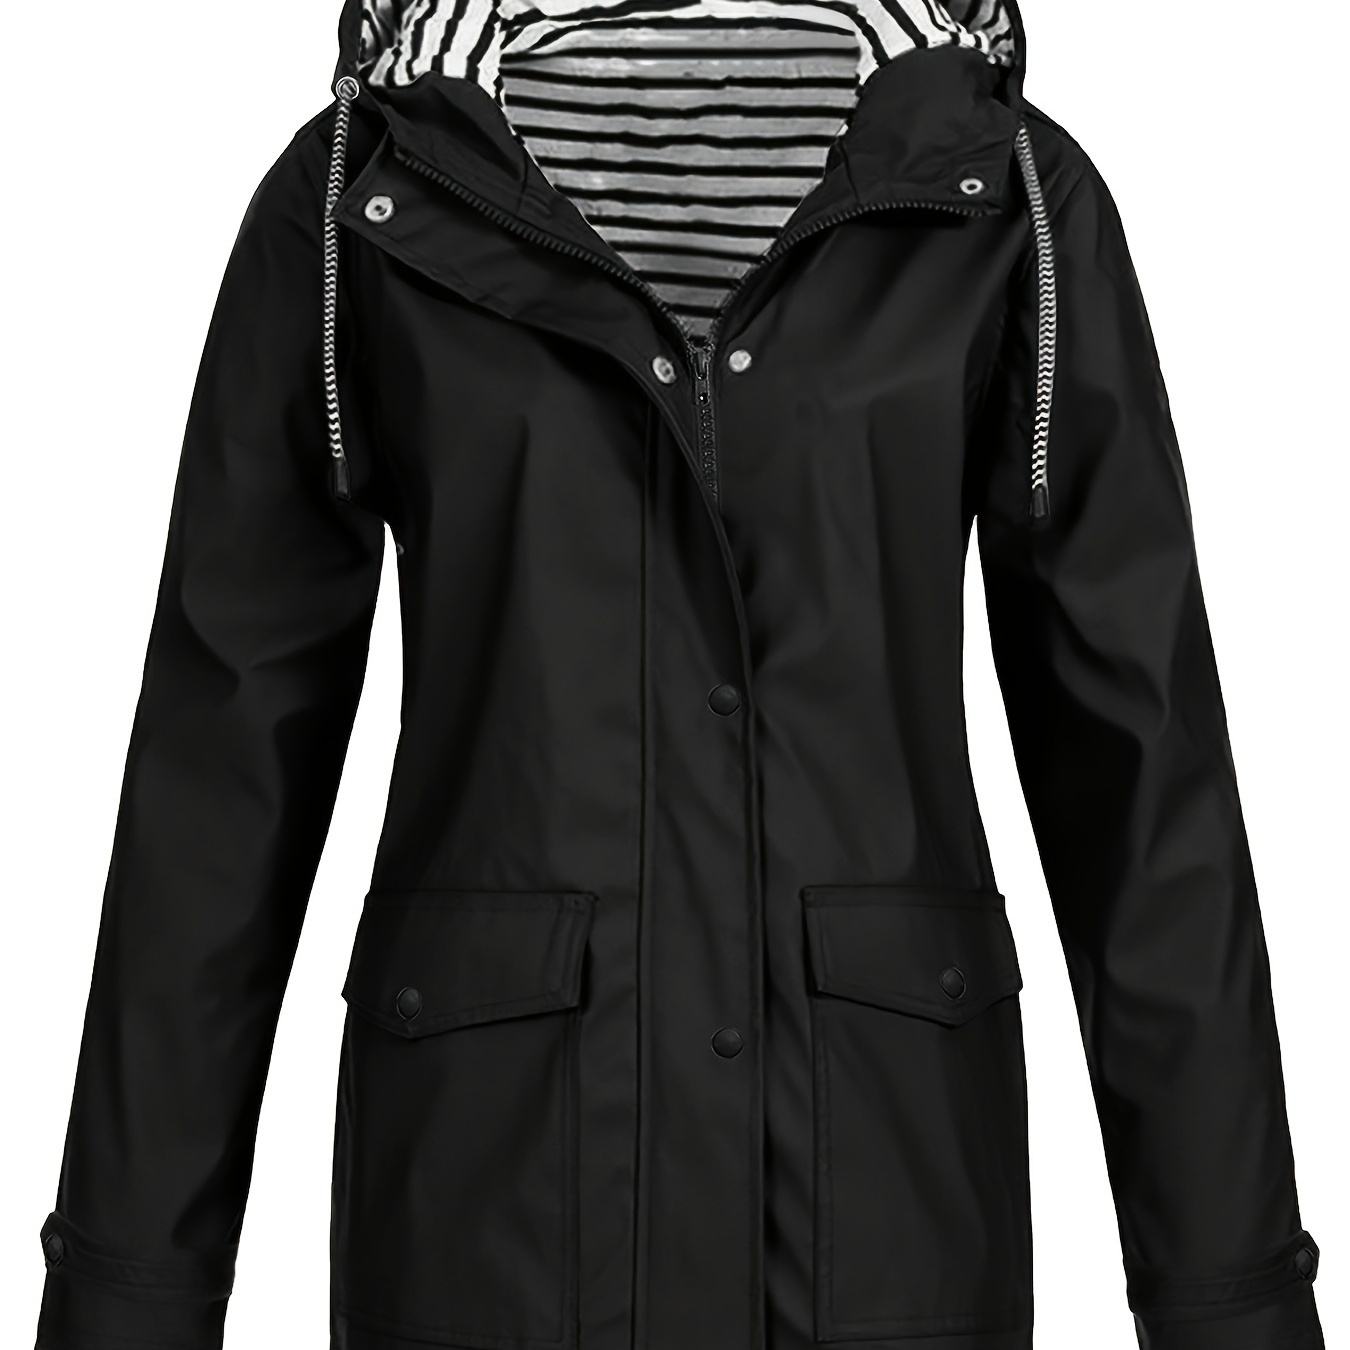 

Striped Lined Zip Up Jacket, Casual Long Sleeve Drawstring Hooded Outerwear For Fall & Winter, Women's Clothing